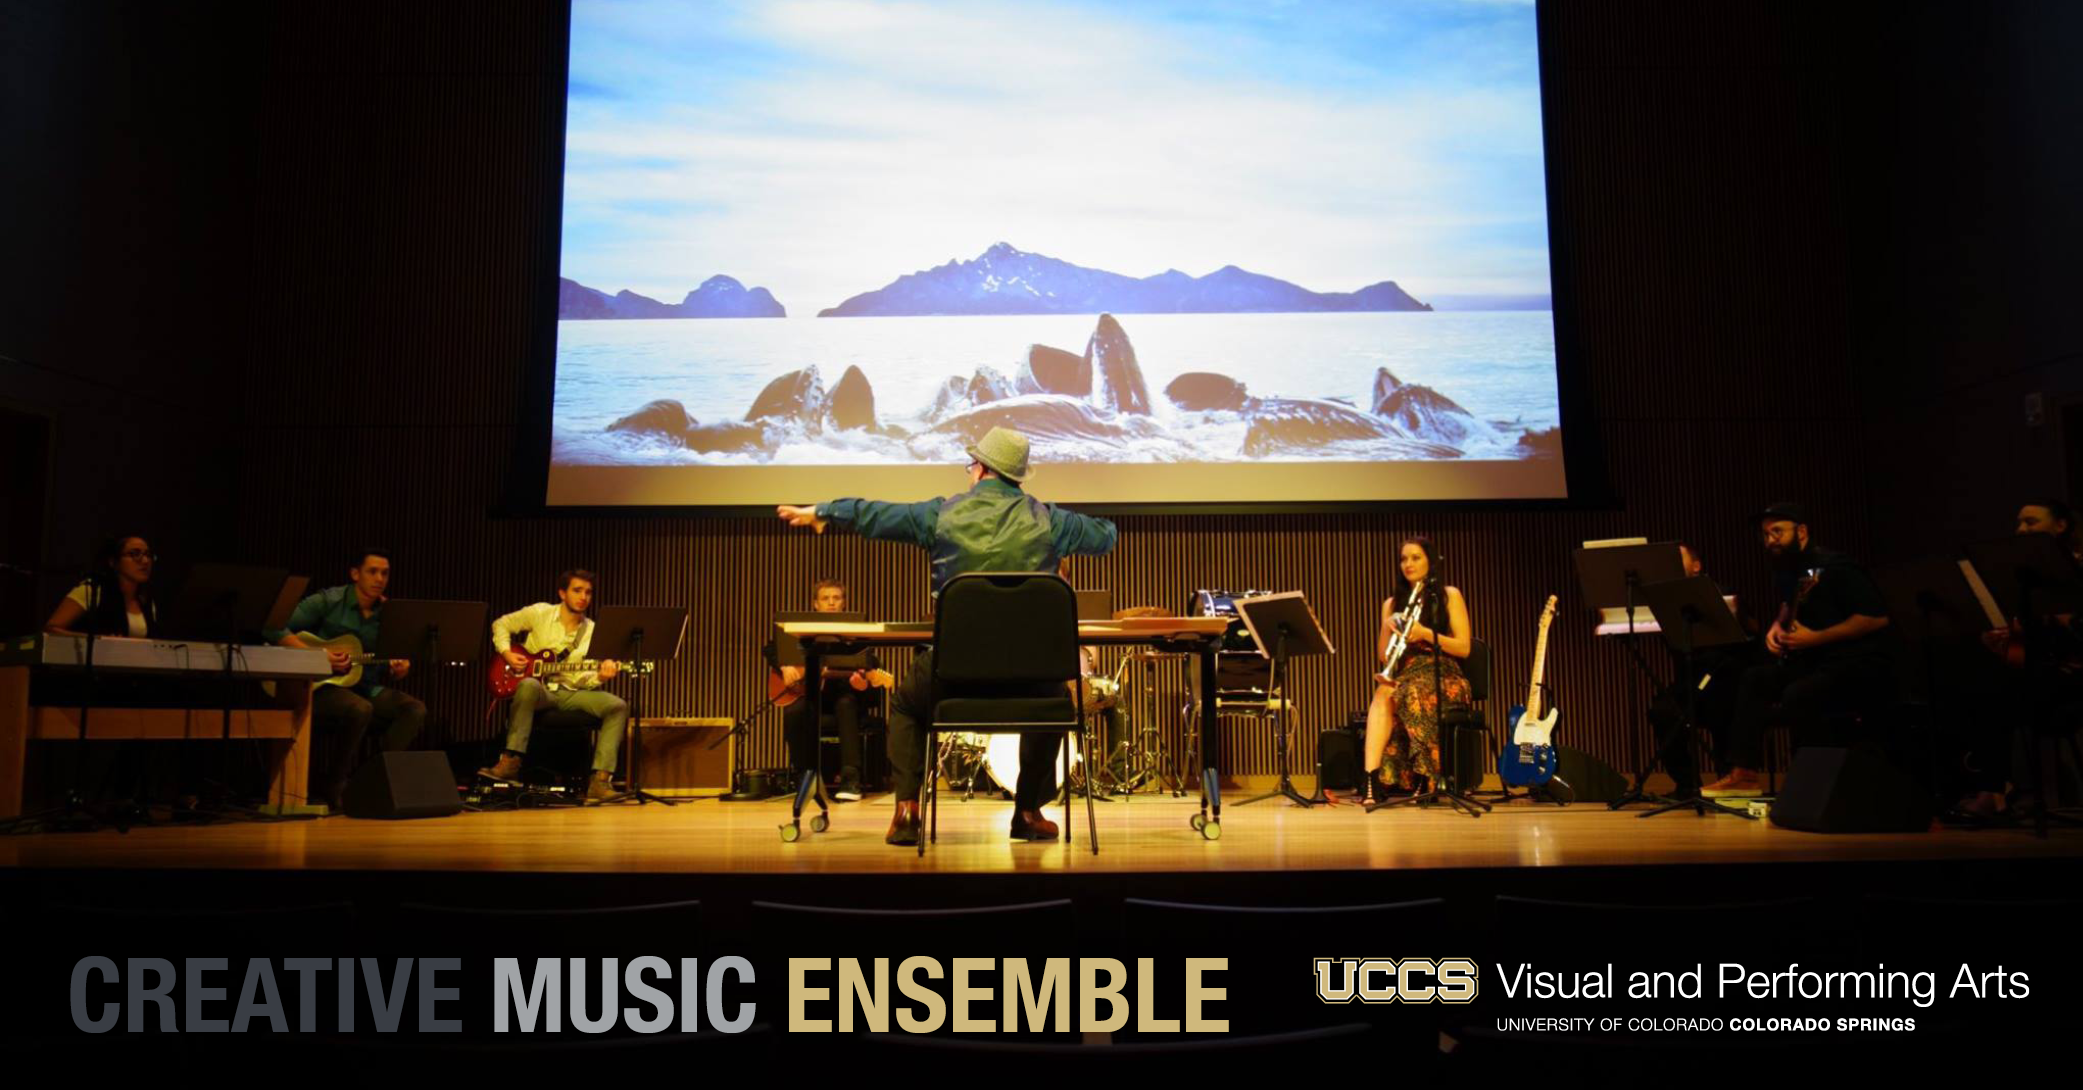 glen whitehead directing the creative music ensemble on the chapman stage in front of a screen with a video of a whale's tail splashing in the ocean